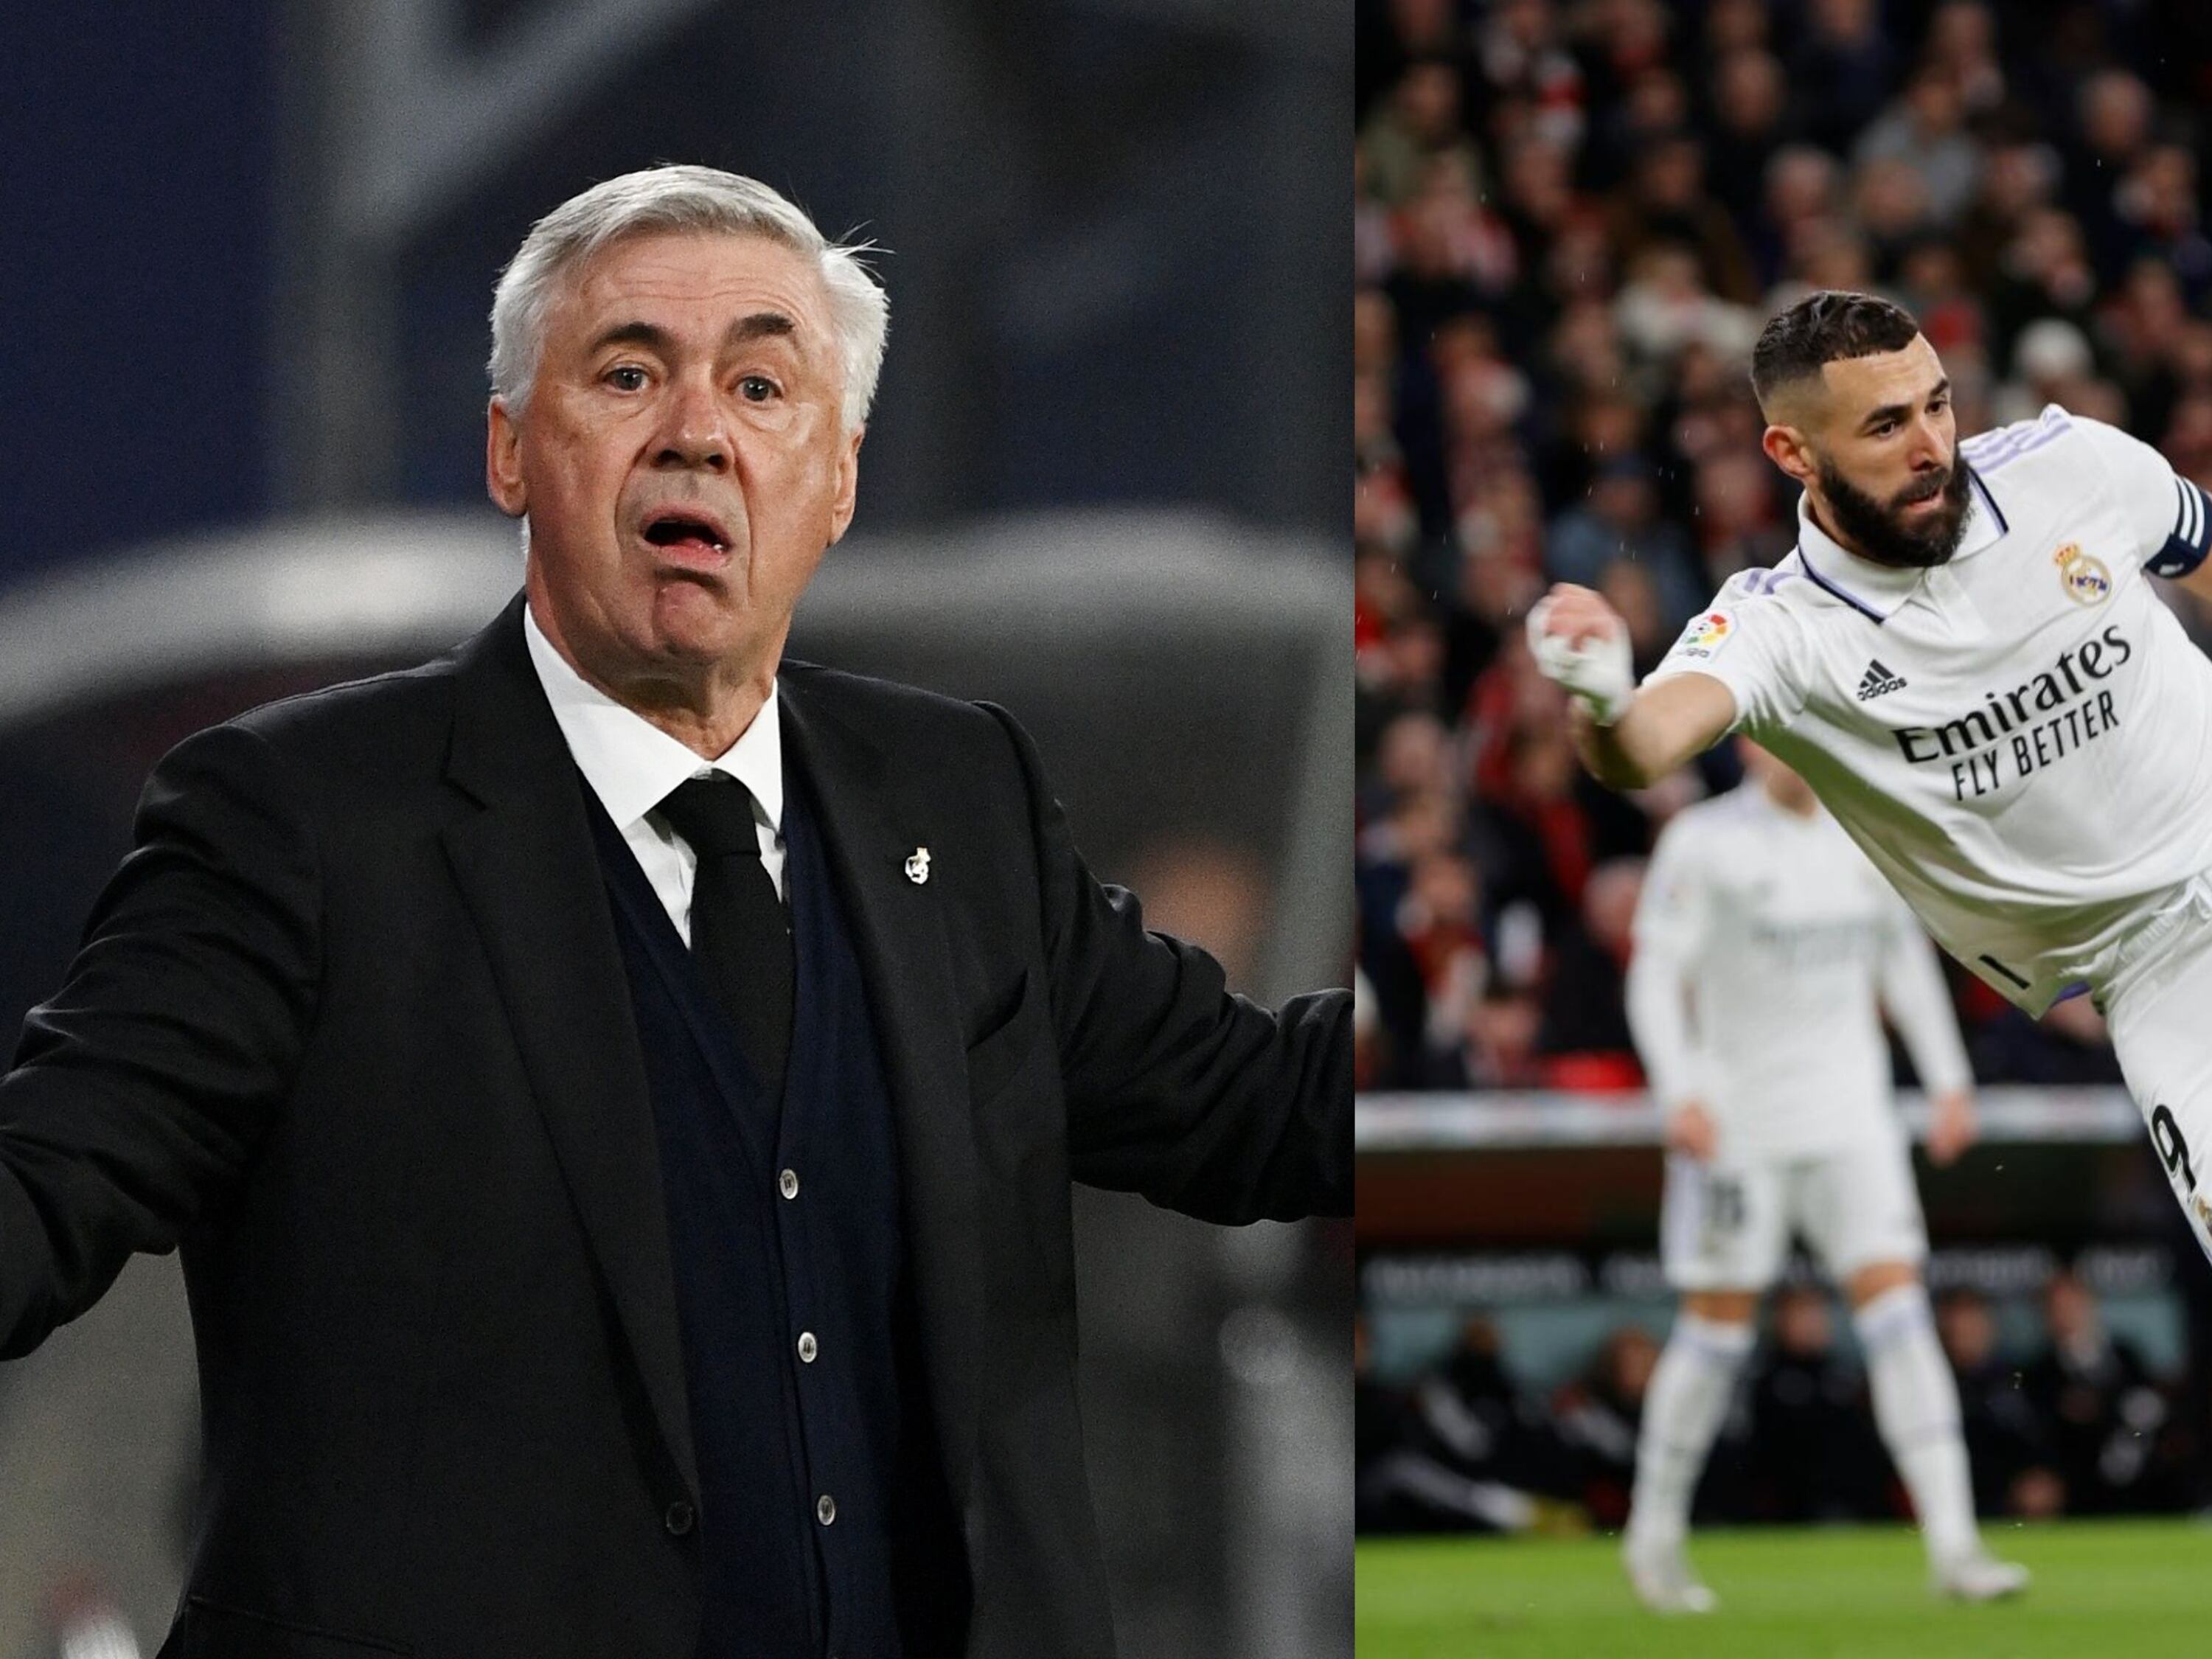 After seeing Benzema shine for Real Madrid, Ancelotti's warning to the squad